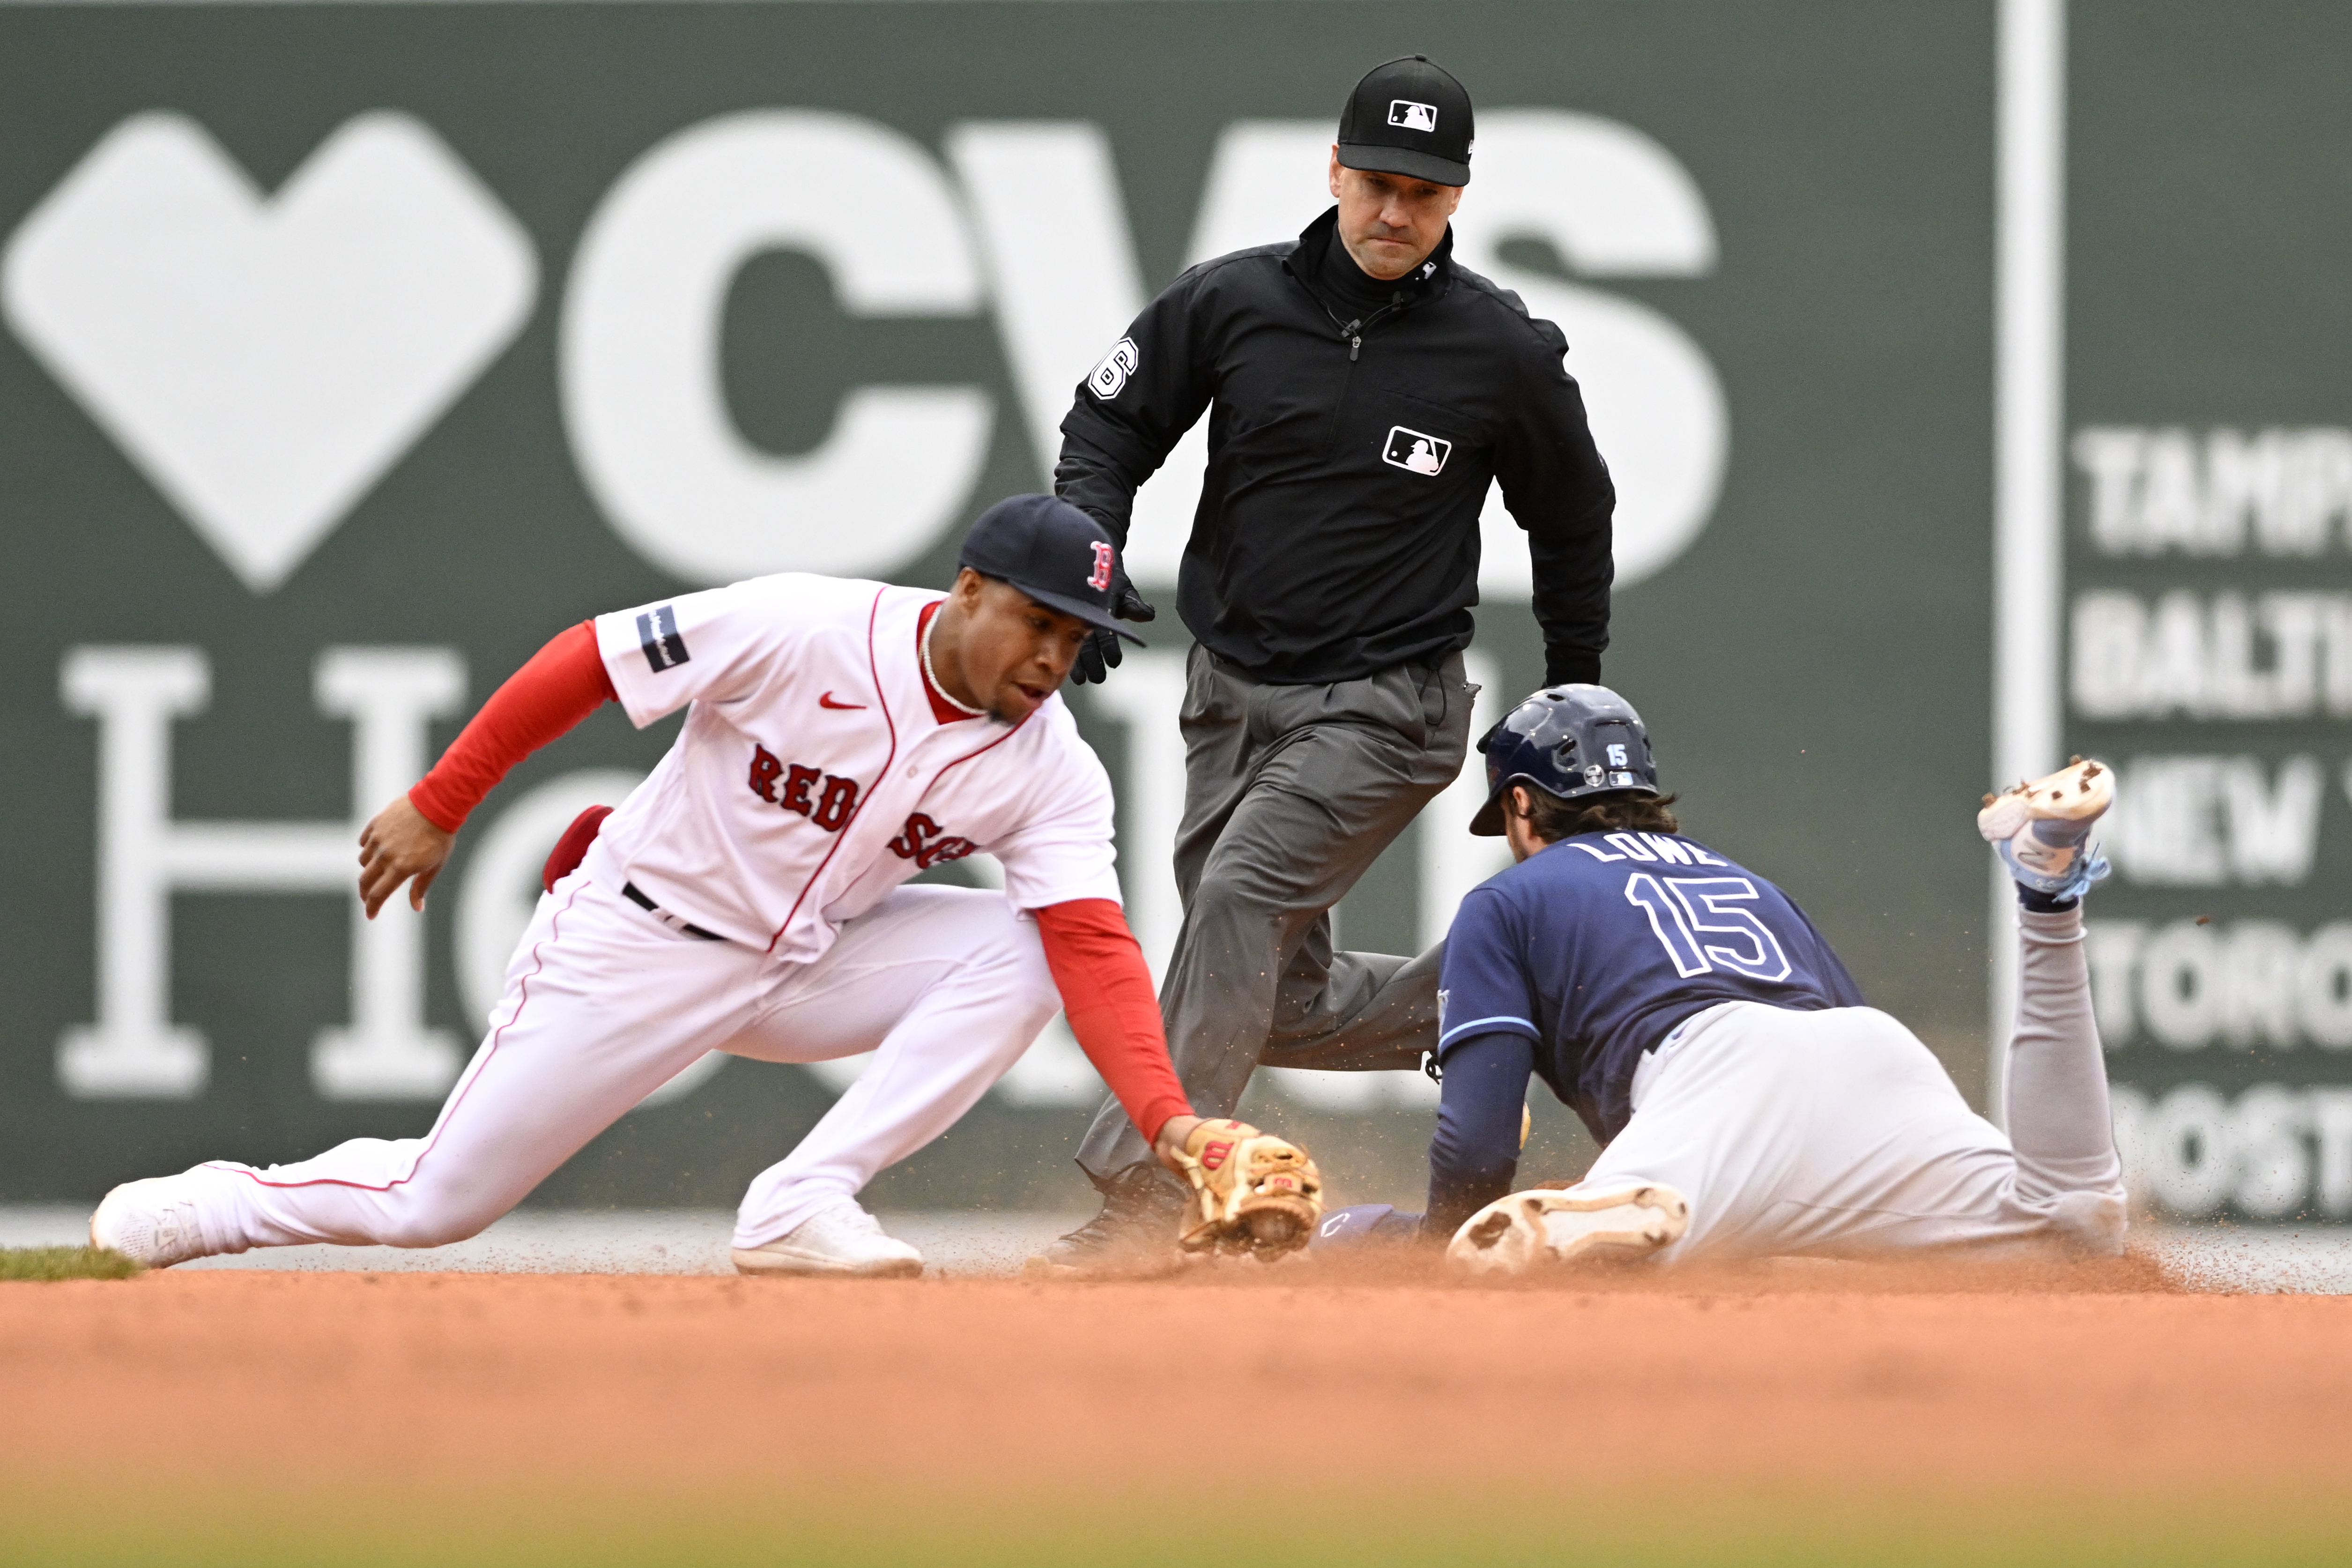 Red Sox's brutal defensive blunder leads to Rays Little League